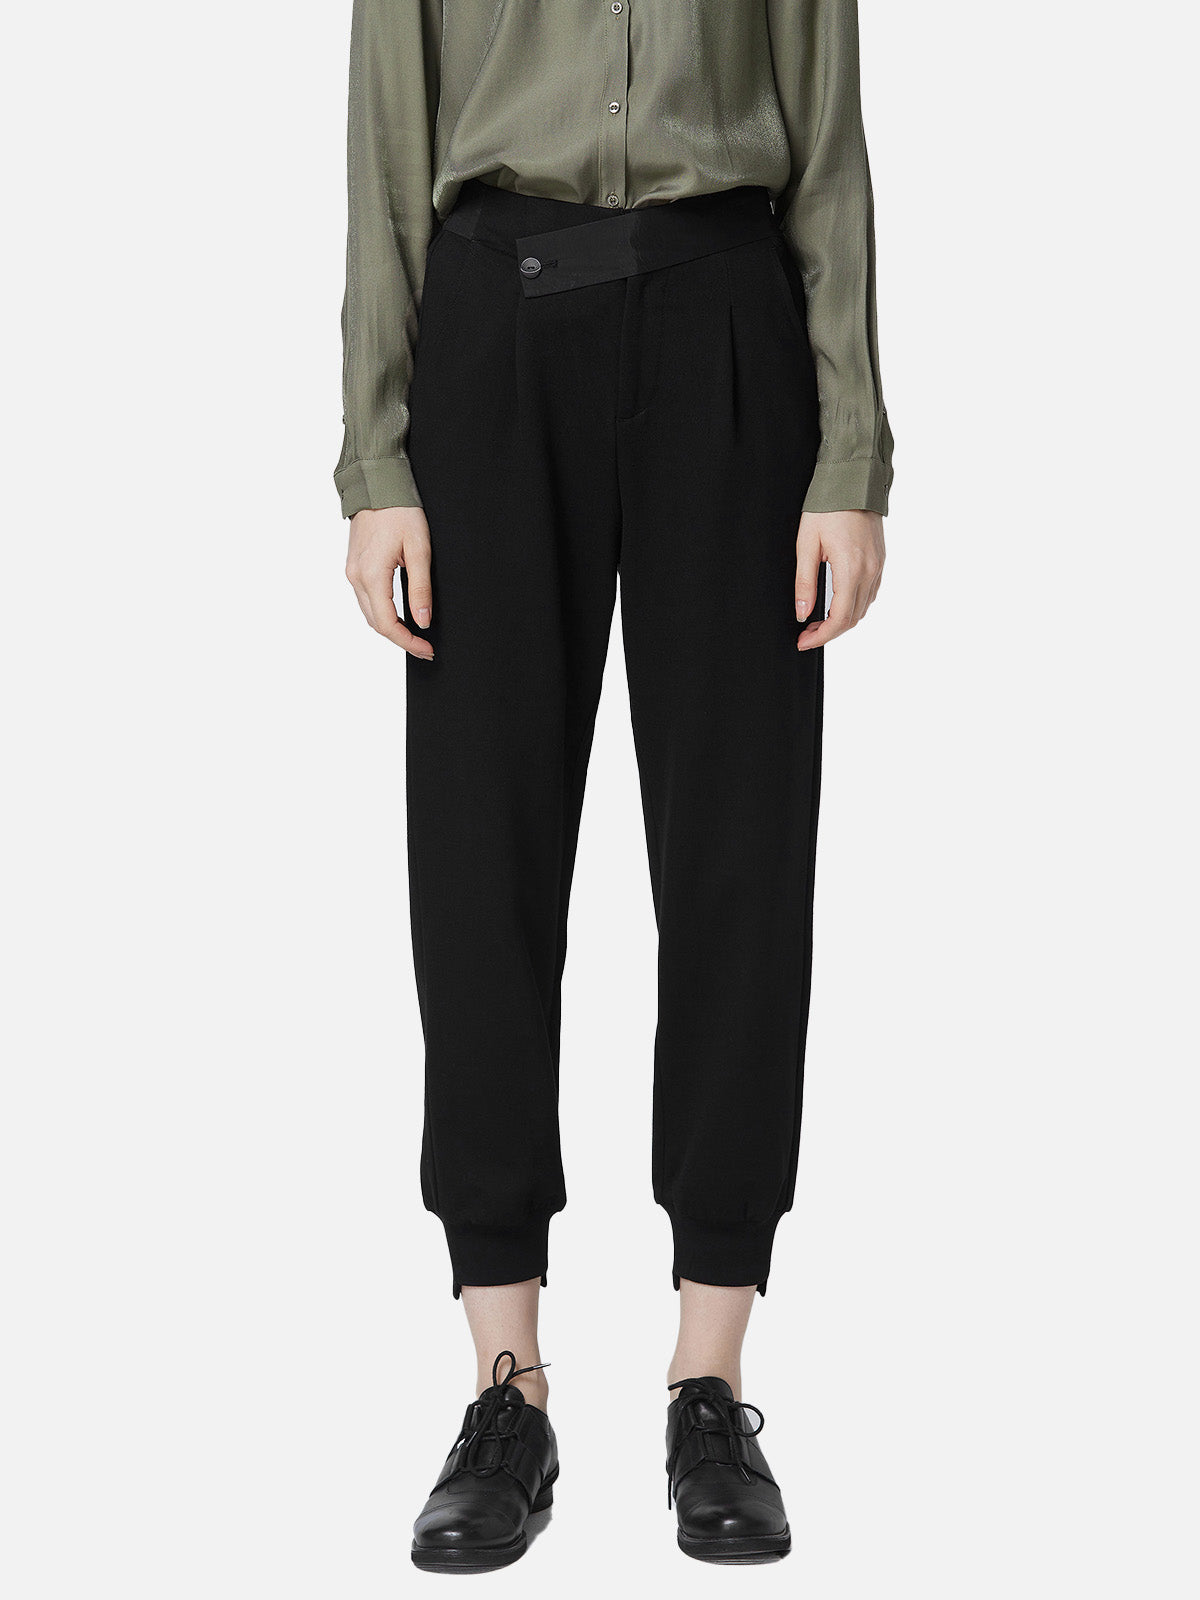 Casual Elasticity Patchwork Black Carrot Pants Cropped Pants